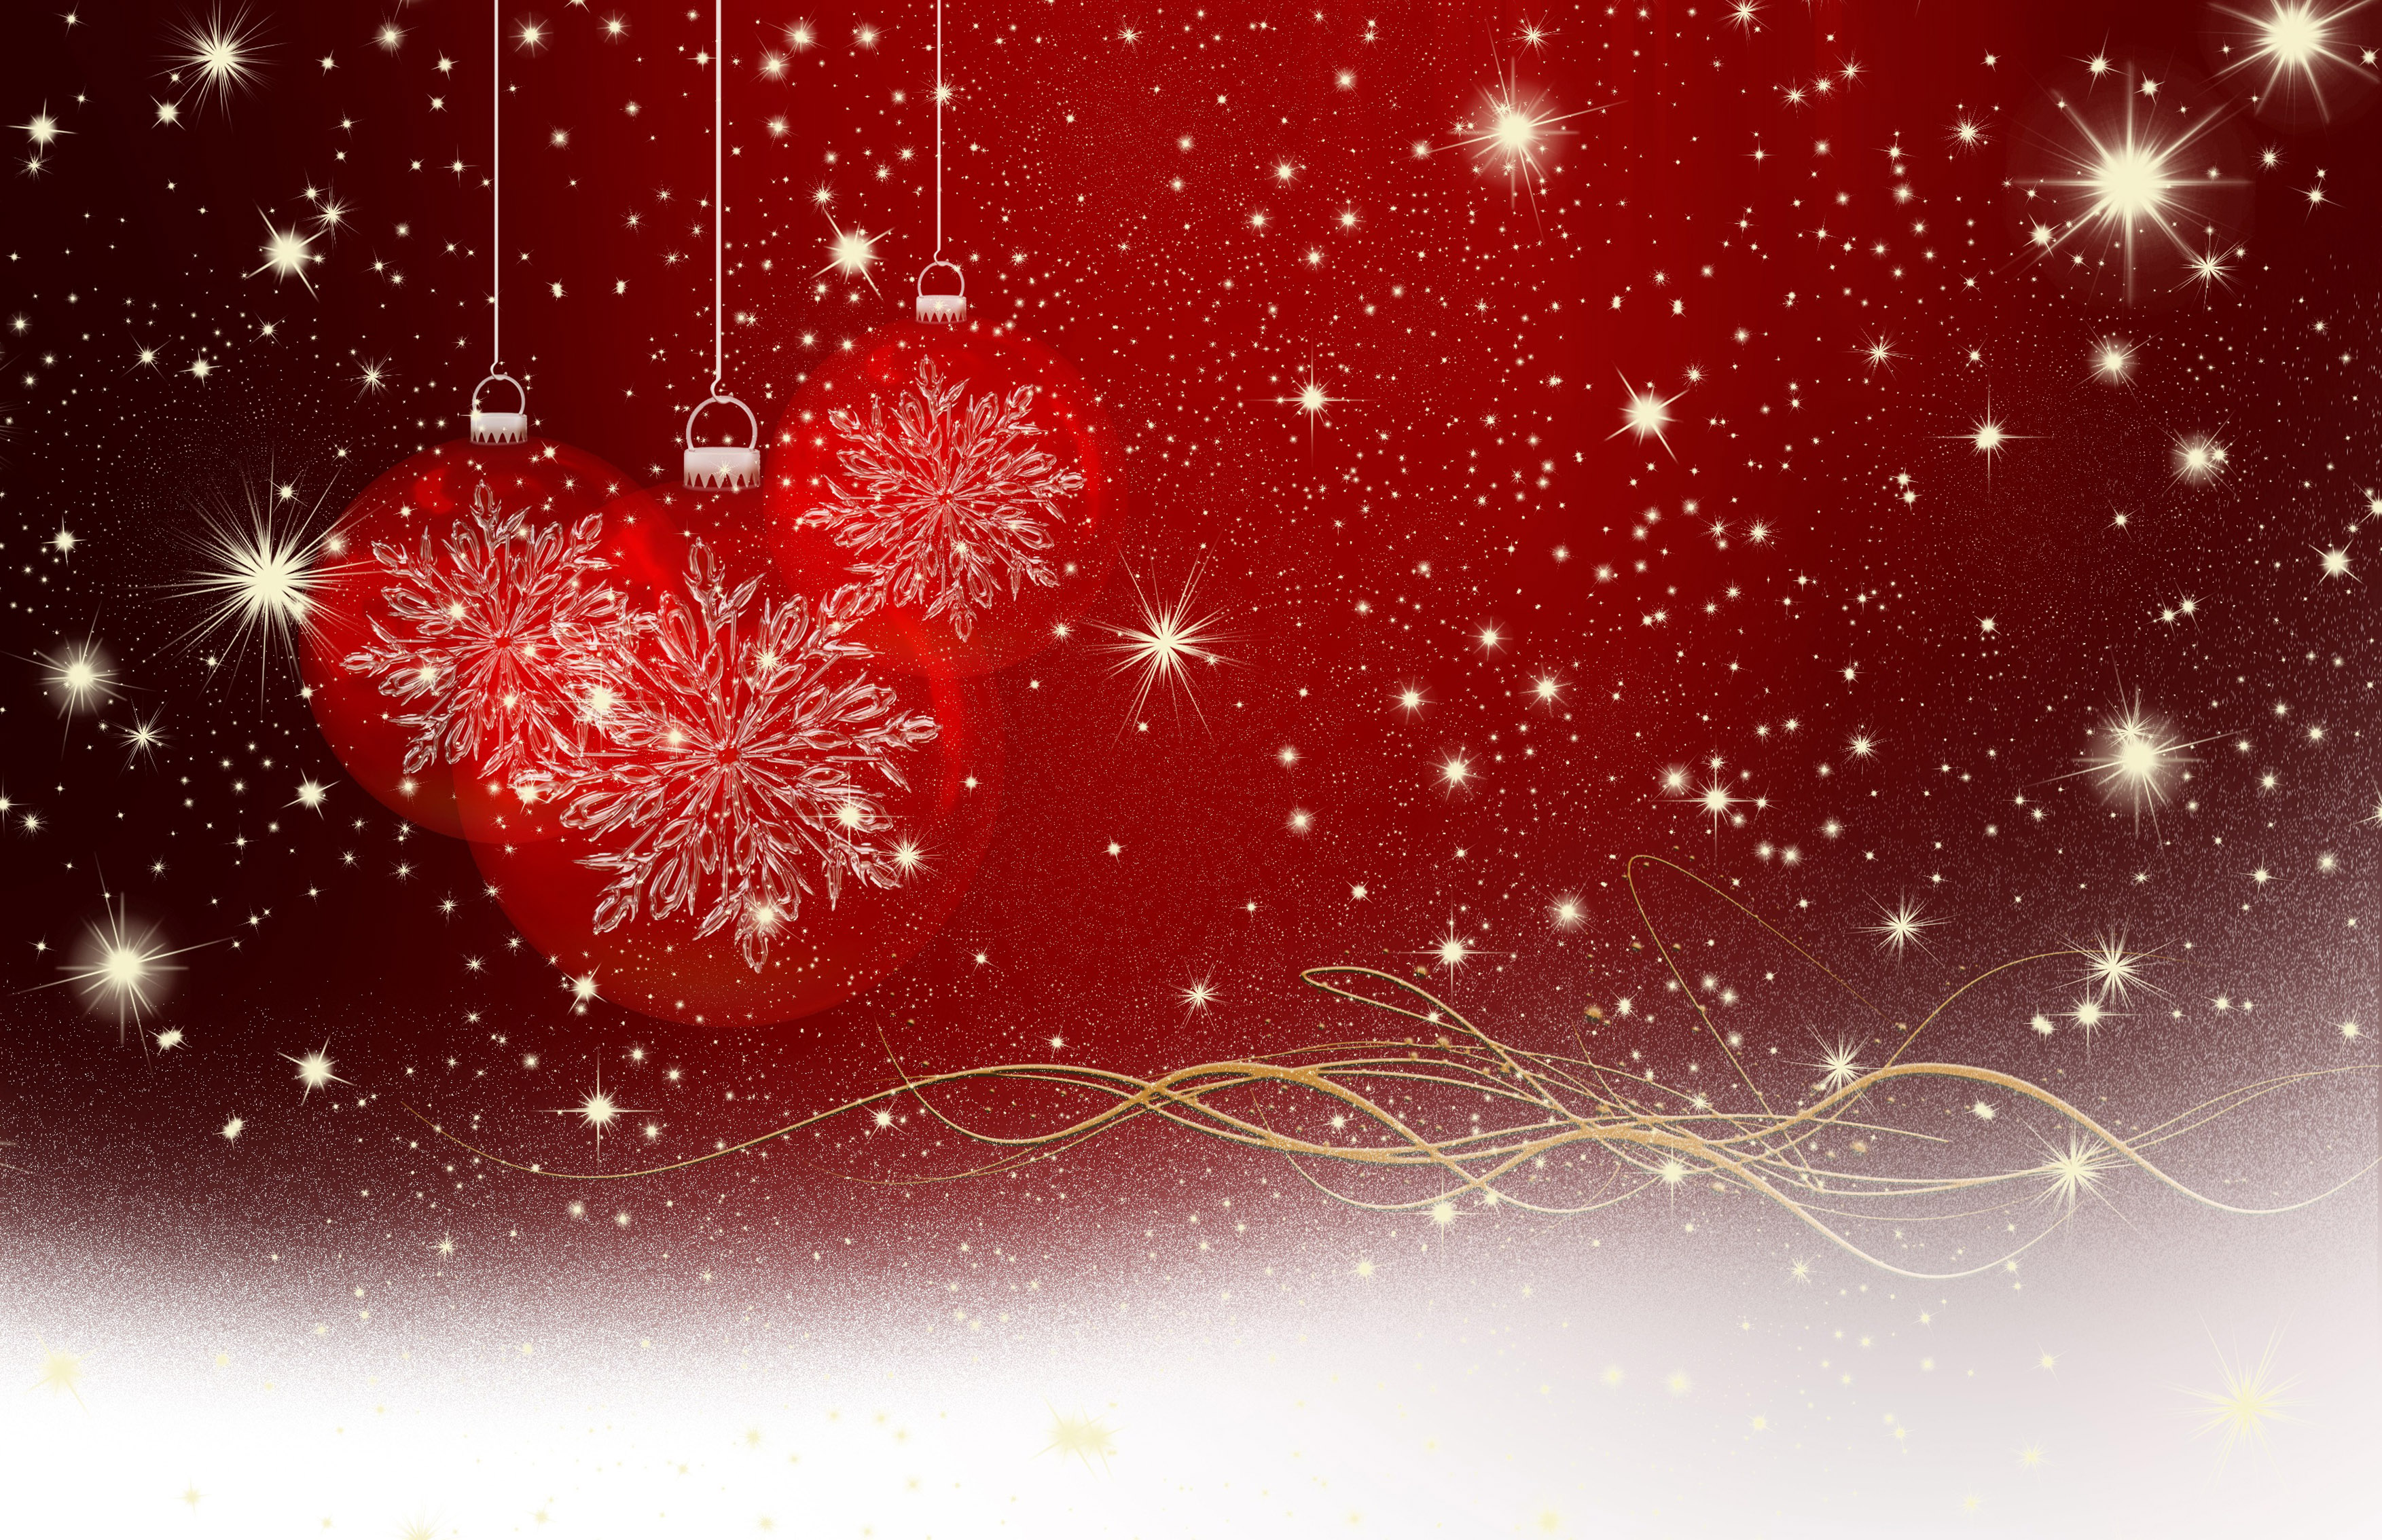 xmas wallpaper,fireworks,red,heart,new years day,holiday